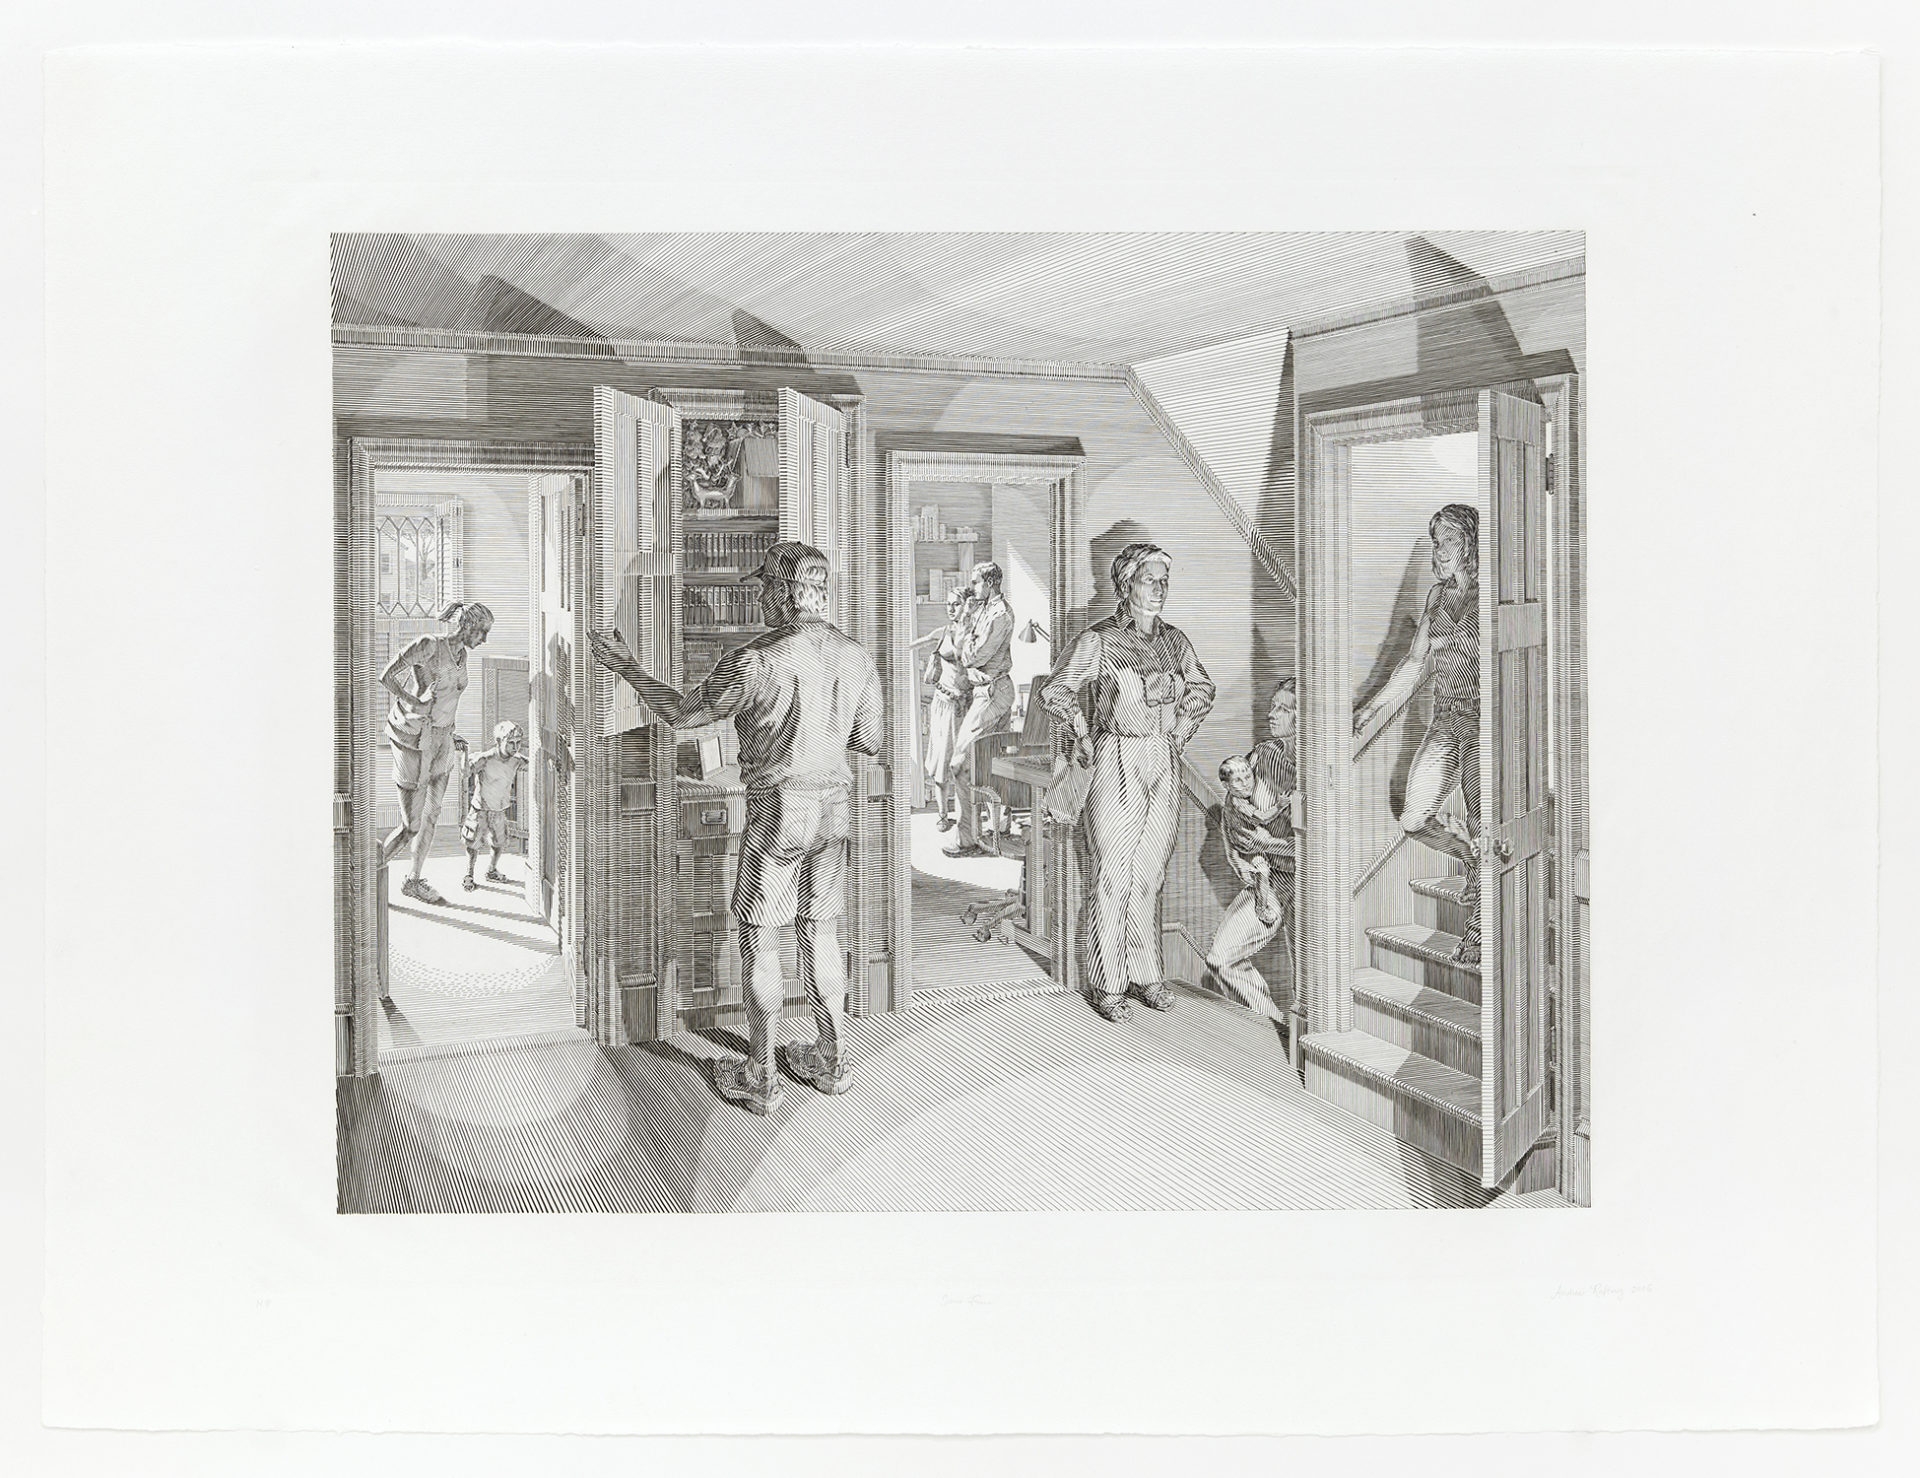 Open House: Five Engraved Scenes - Scene Four - Upstairs Hallway, 2008, Copperplate engraving, 22 x 30 inches (55.9 x 76.2 cm), Edition of 50